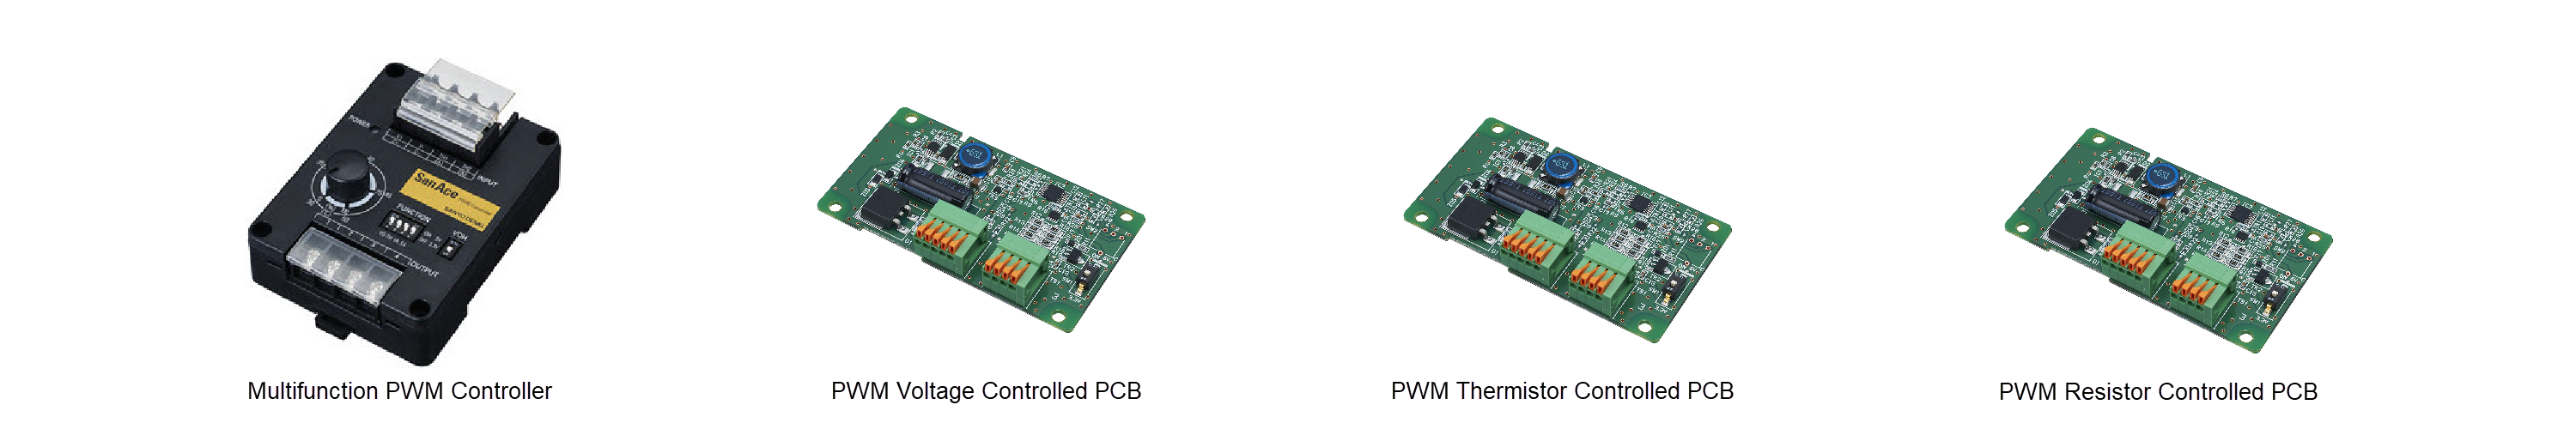 PWM Controllers